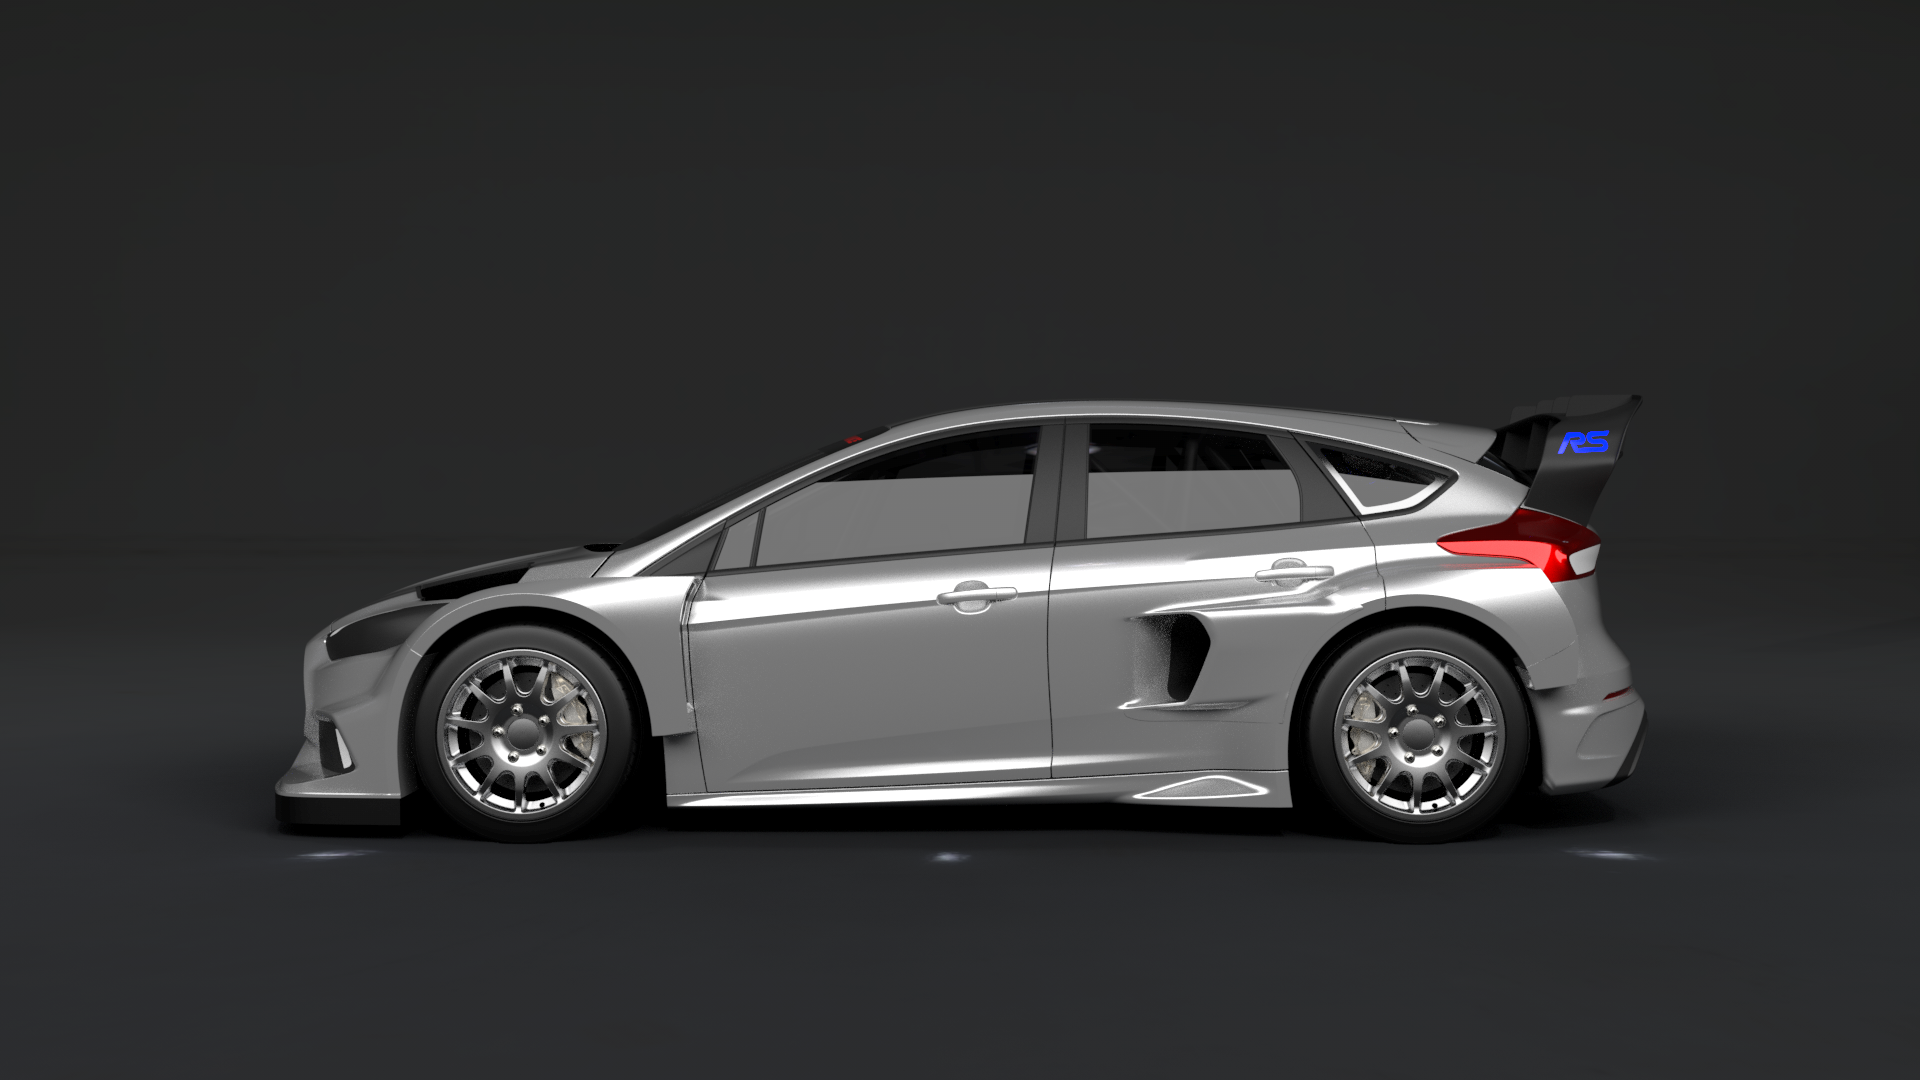 39++ Ford focus rally car specs info